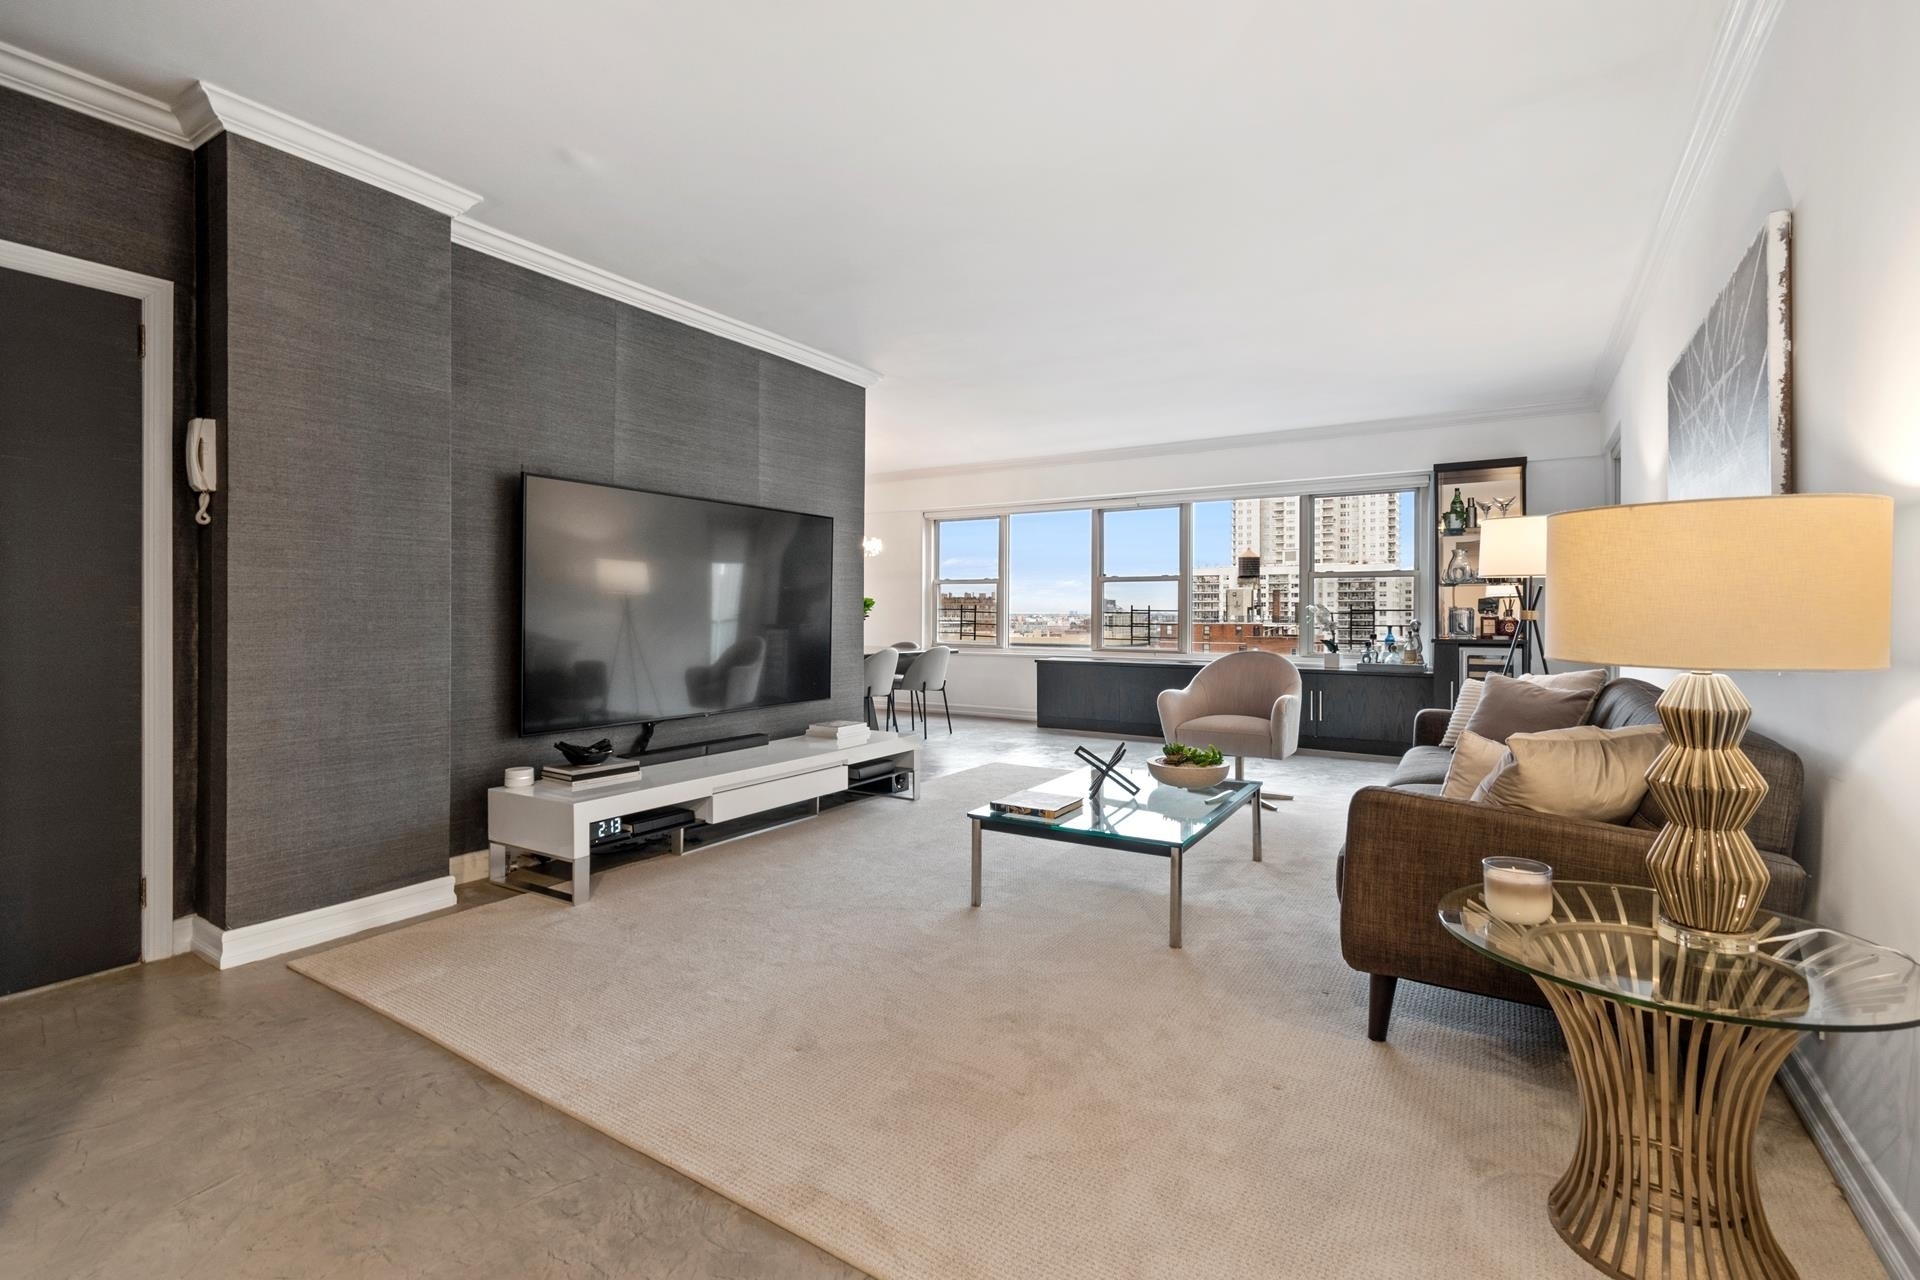 Co-op Properties for Sale at Newport East, 370 E 76TH ST, B1403/1404 Lenox Hill, New York, NY 10021